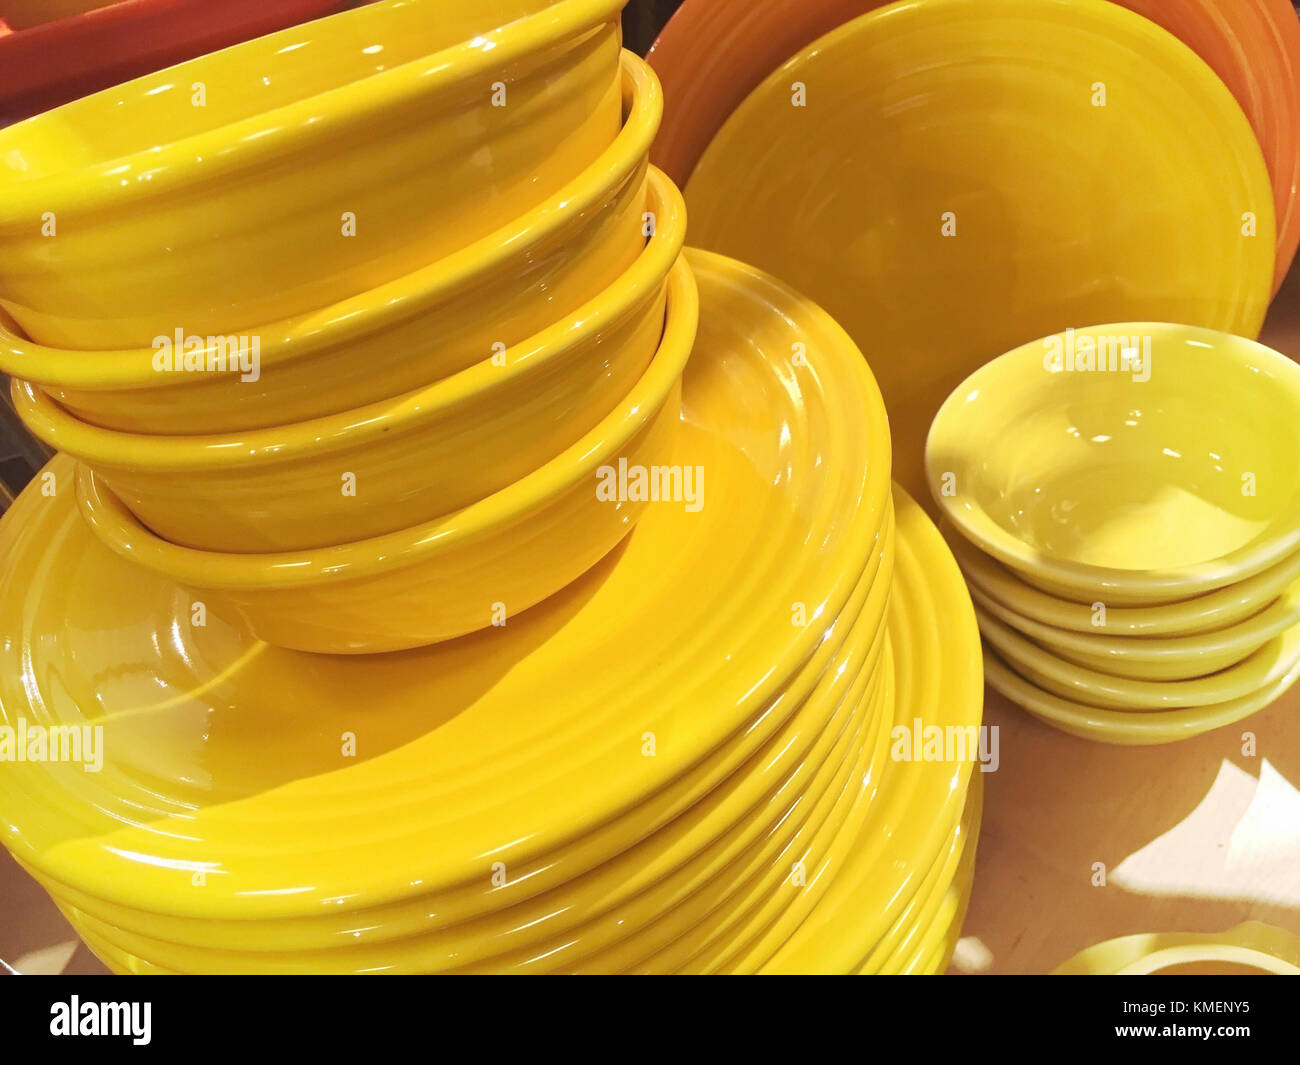 Fiesta Ware at Macy's Flagship Department Store, Herald Square, New York City, United States (U.S.A.) Stock Photo